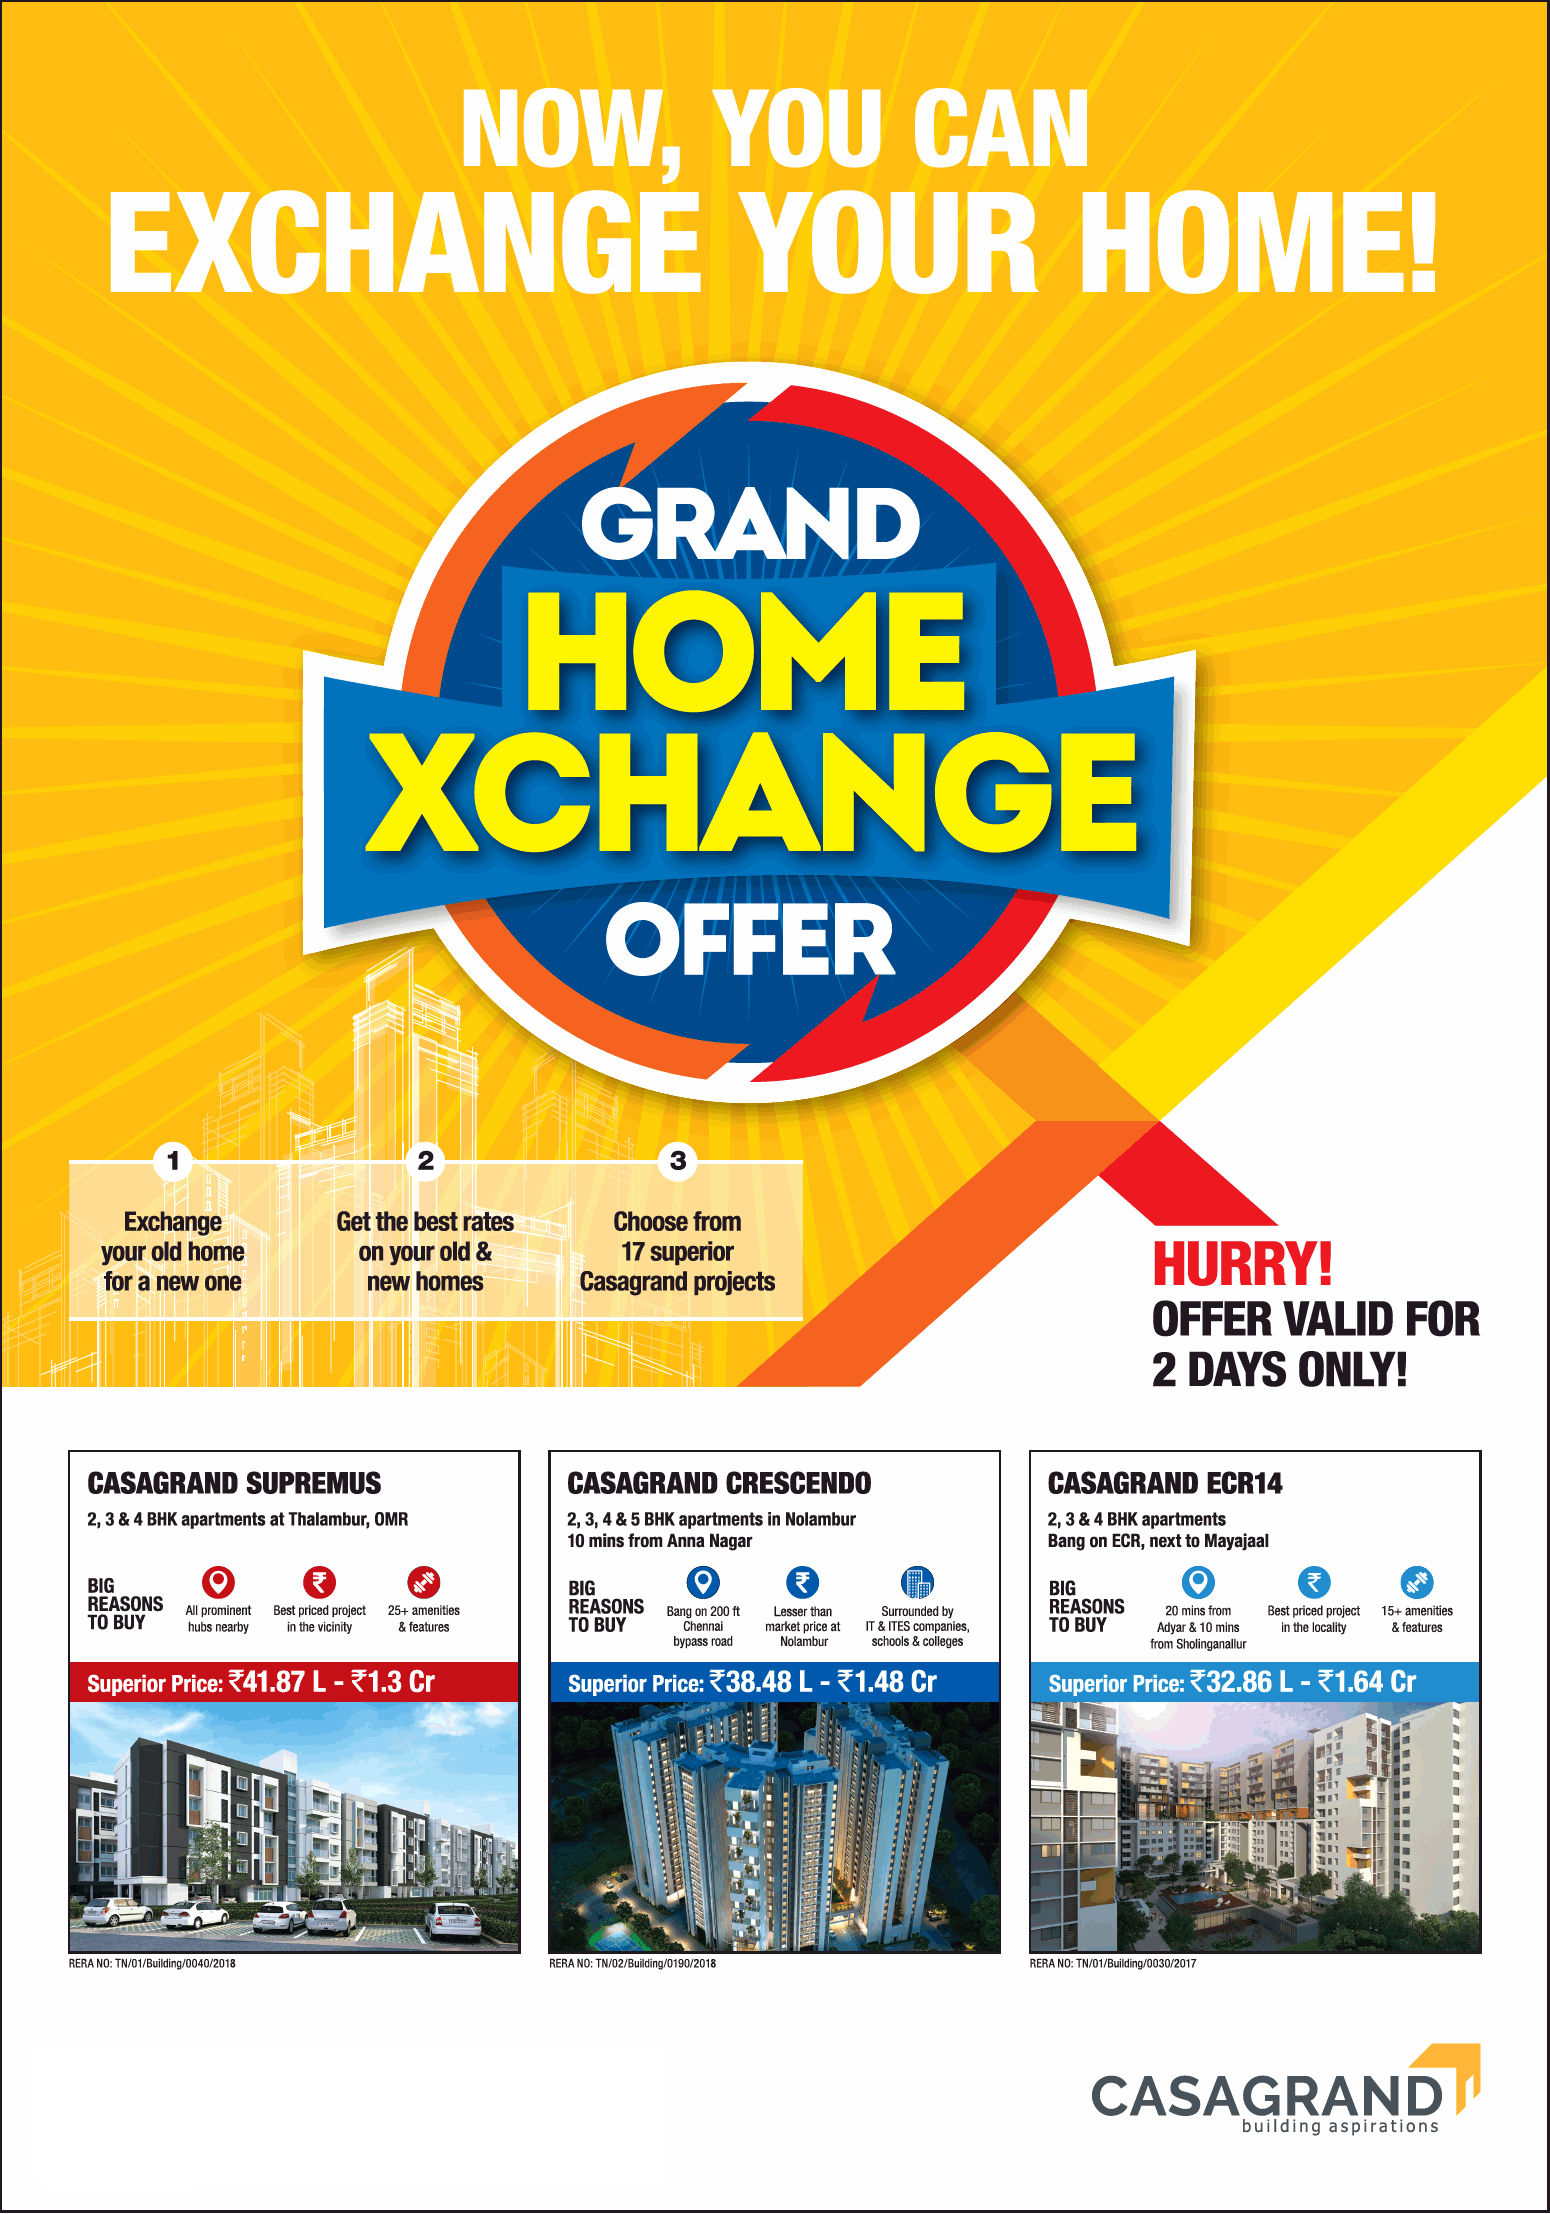 Grand home exchange offer at Casagrand Projects in Chennai